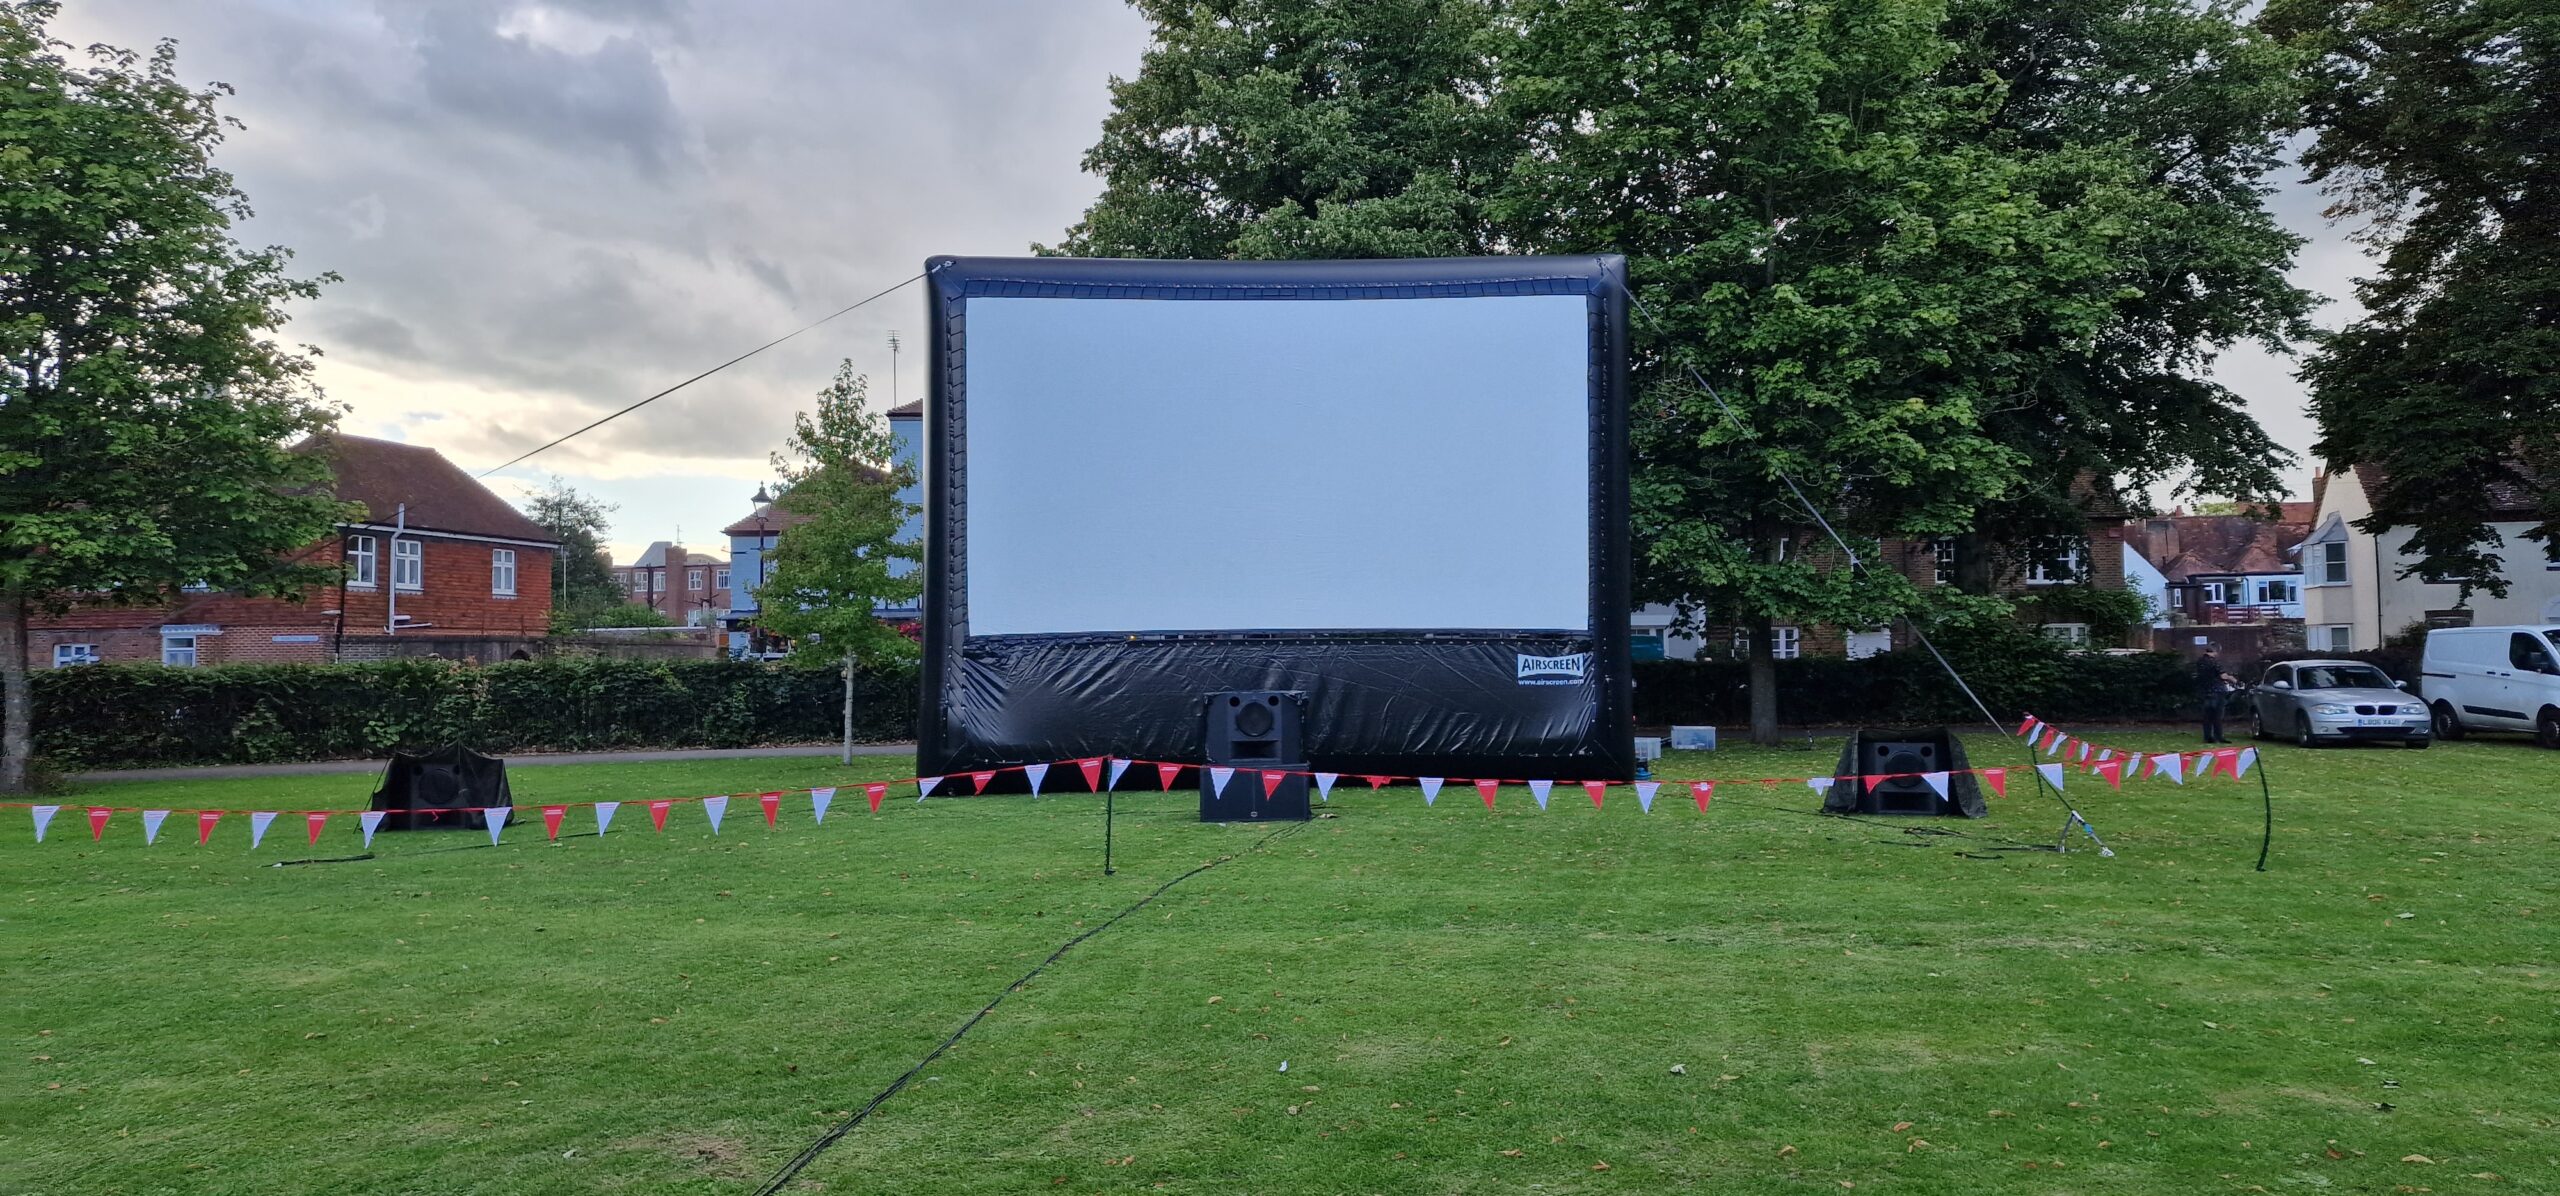 Proscreens Hire Brings Outdoor Cinema to Chichester Film Festival